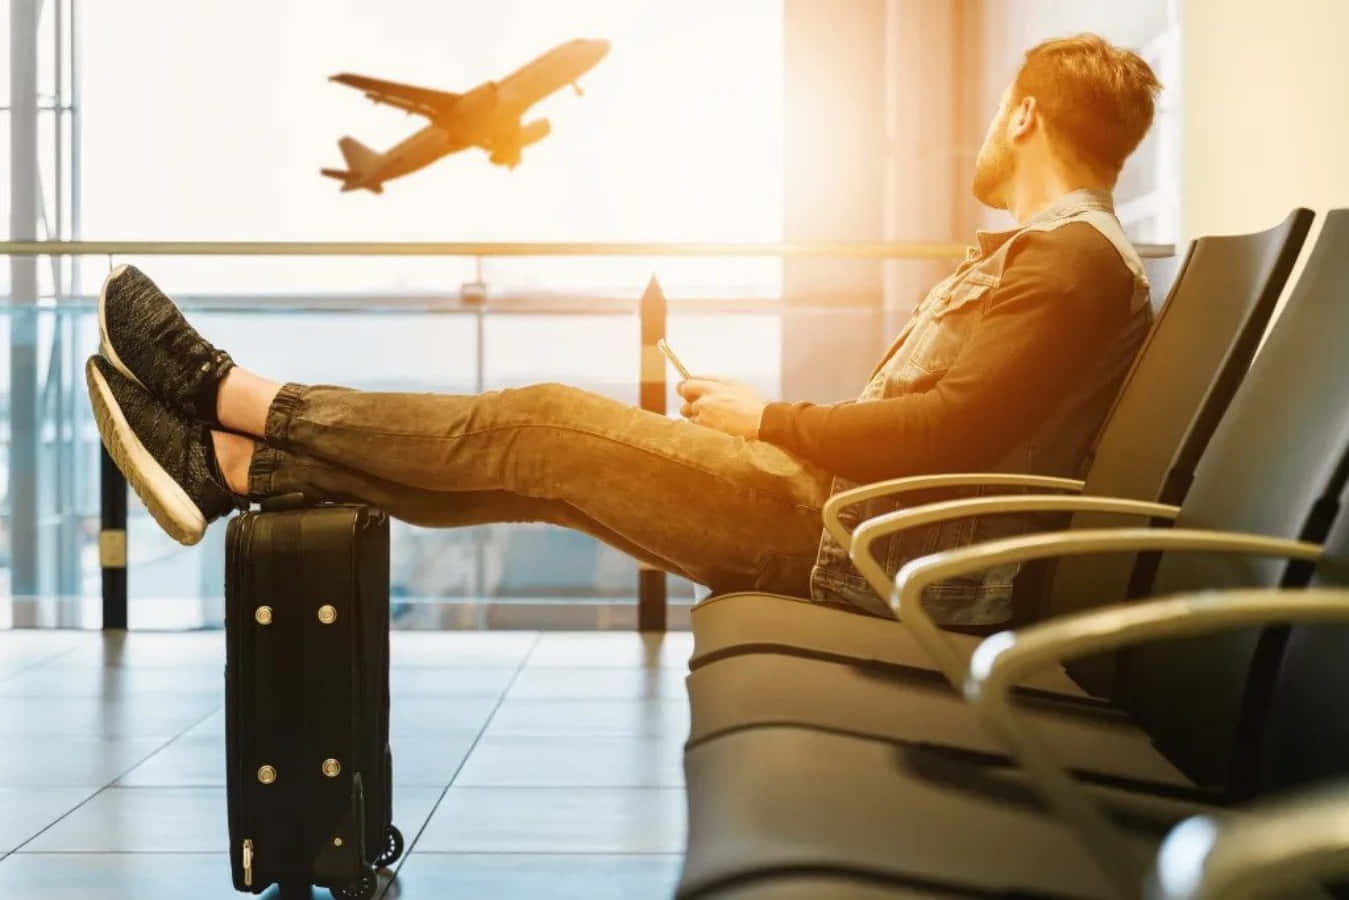 Man Sitting In Airport Waiting For Plane